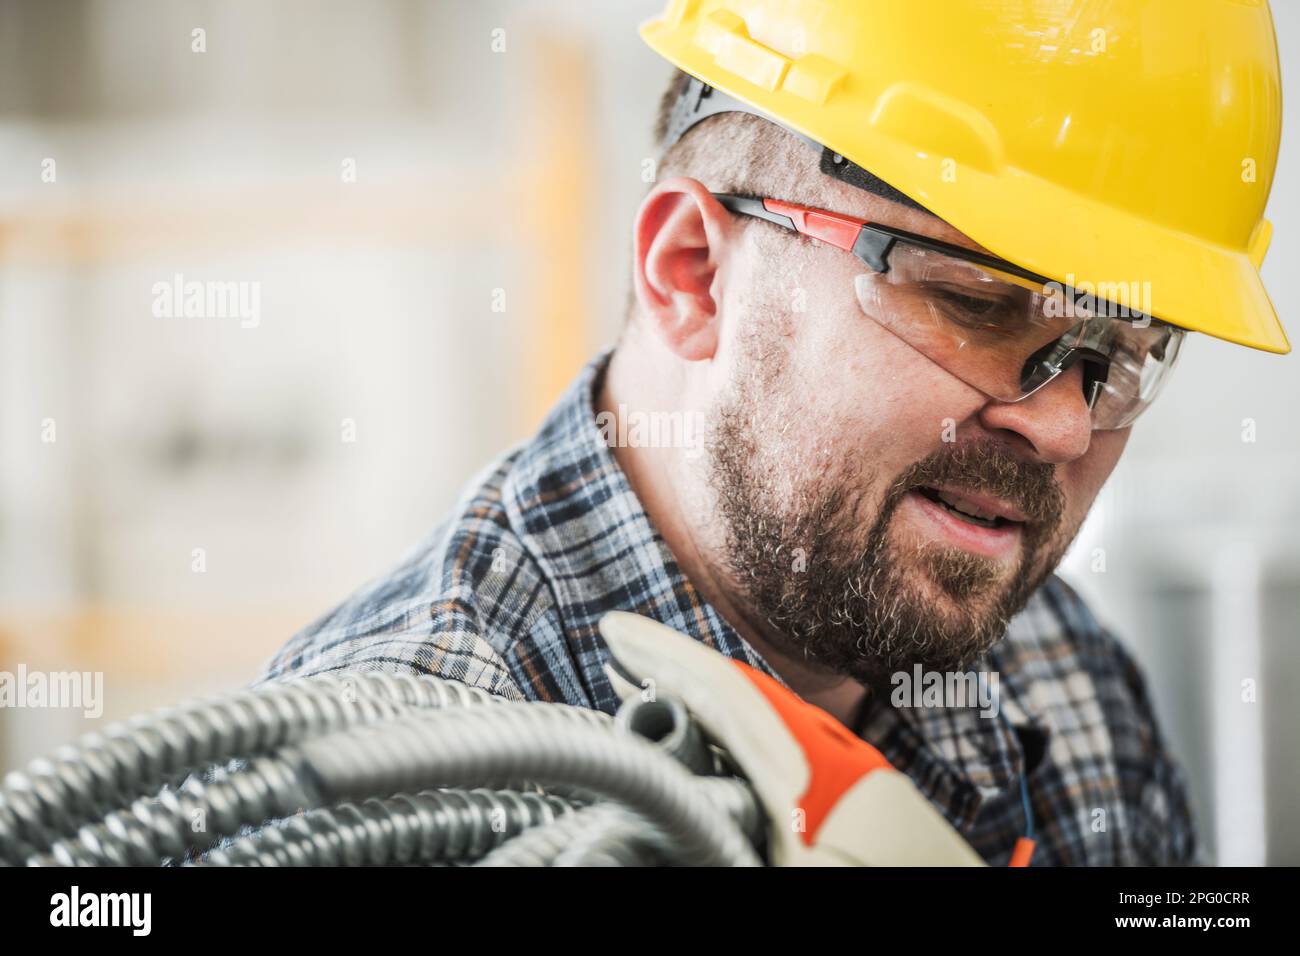 Caucasian Professional Electric Contractor Worker in His 30s with Electric Conduit. Wearing Yellow Hard Hat and Protection Glasses. Stock Photo